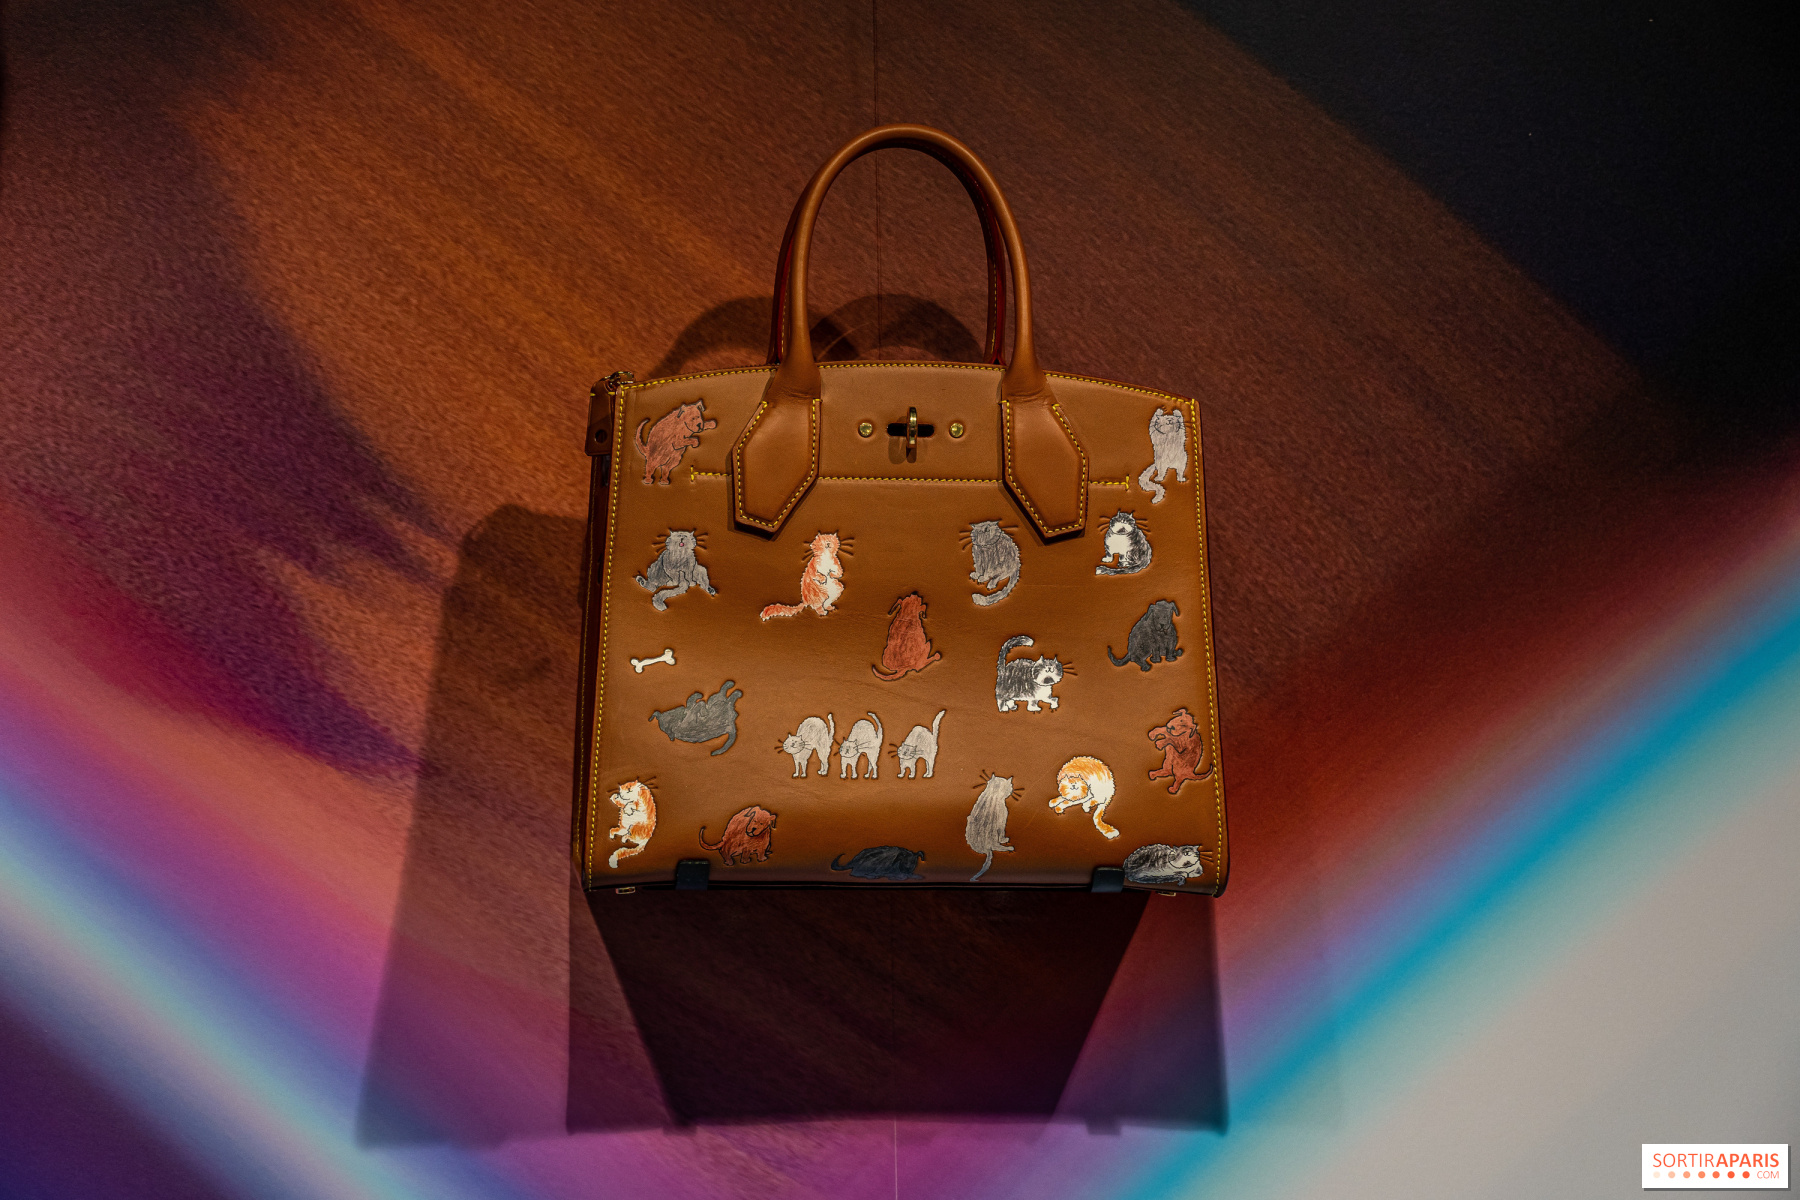 LV Dream by Louis Vuitton is up: free exhibition hall, store, café and  chocolate store in video 